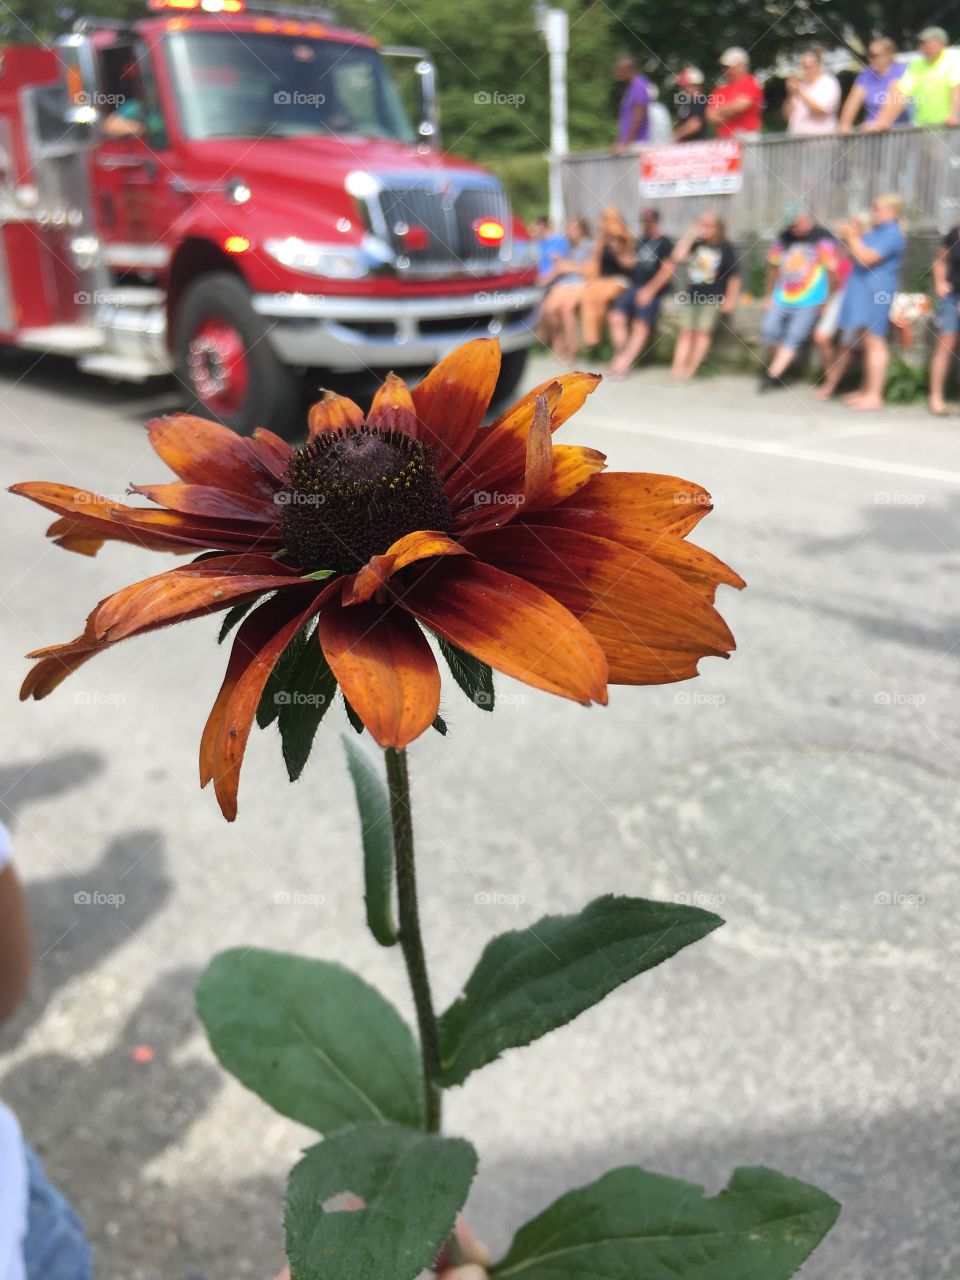 Small town street festival meets lonely flower